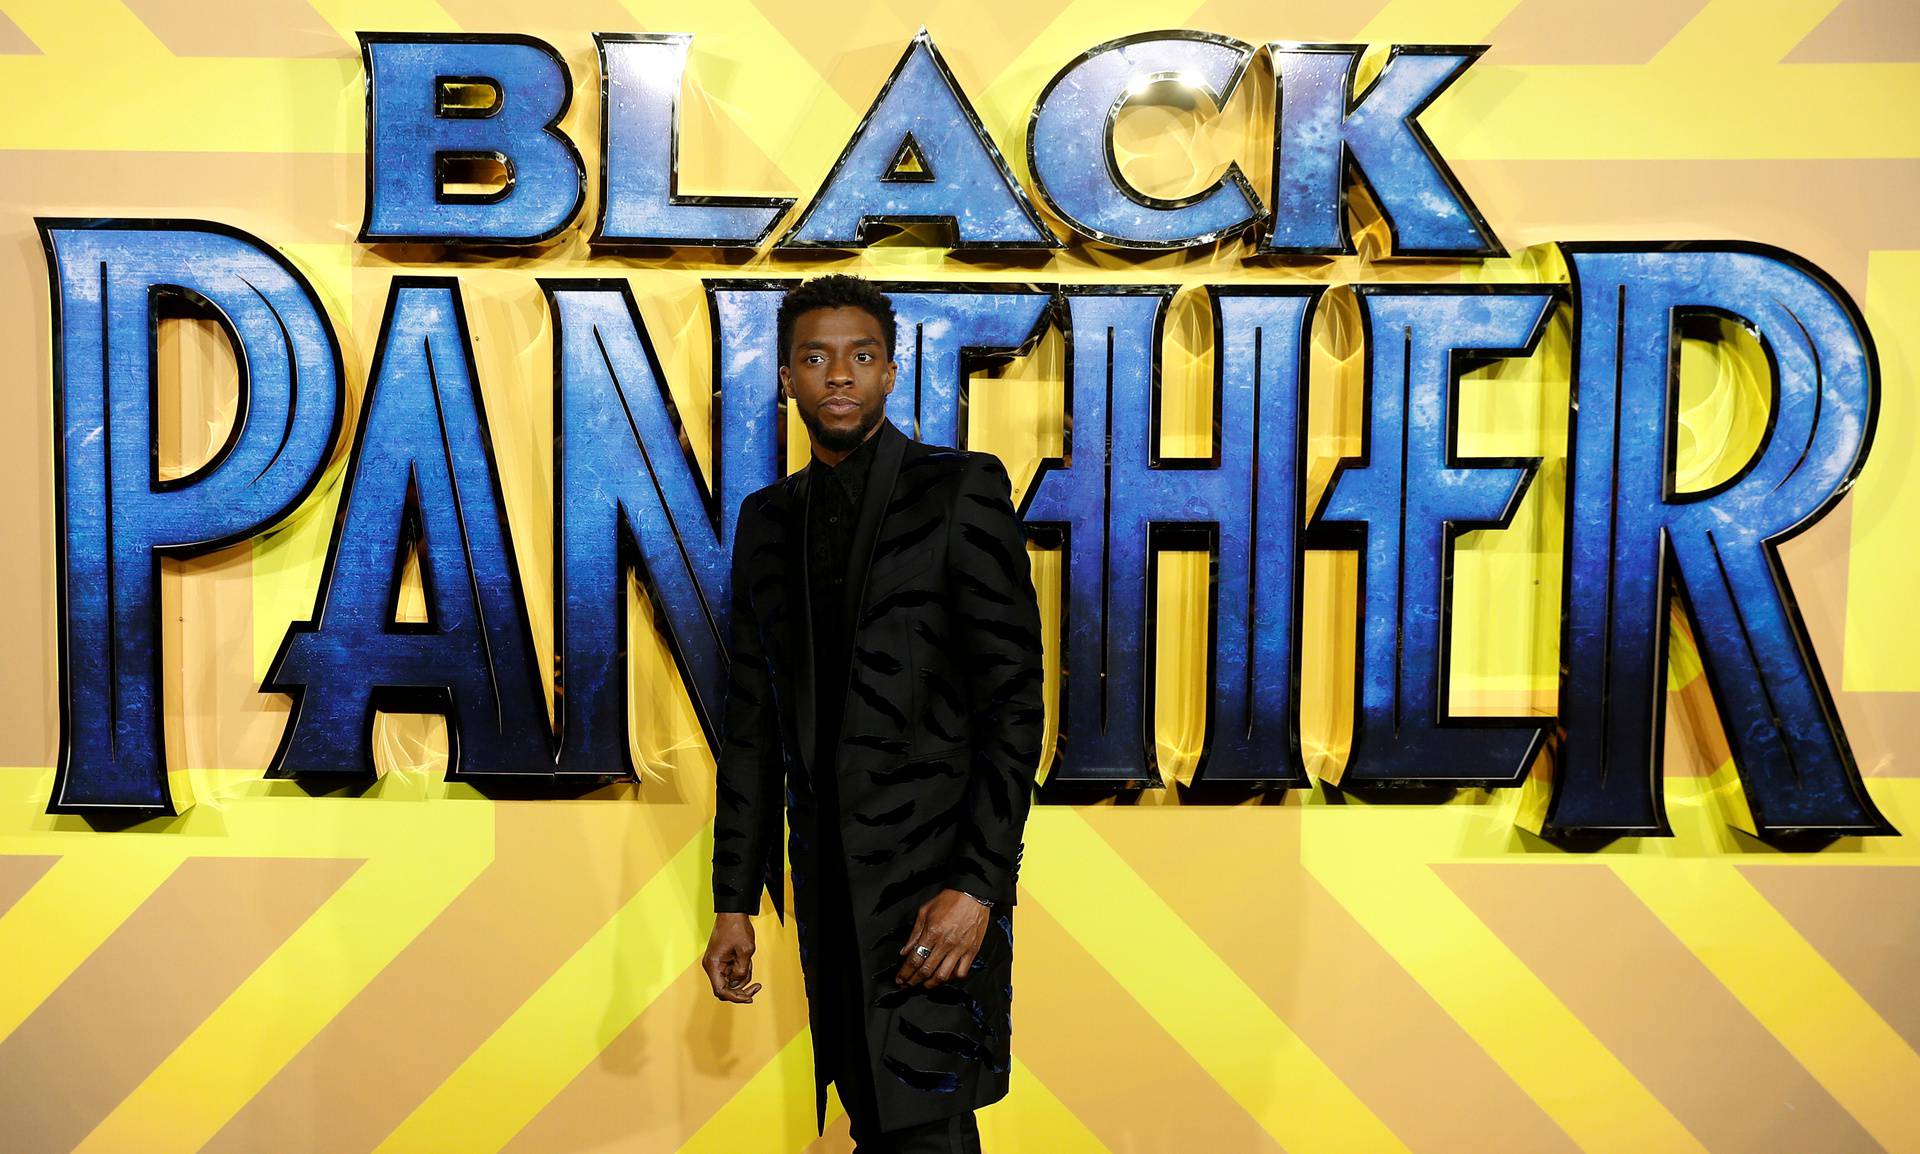 FILE PHOTO: Actor Chadwick Boseman arrives at the premiere of the new Marvel superhero film 'Black Panther' in London